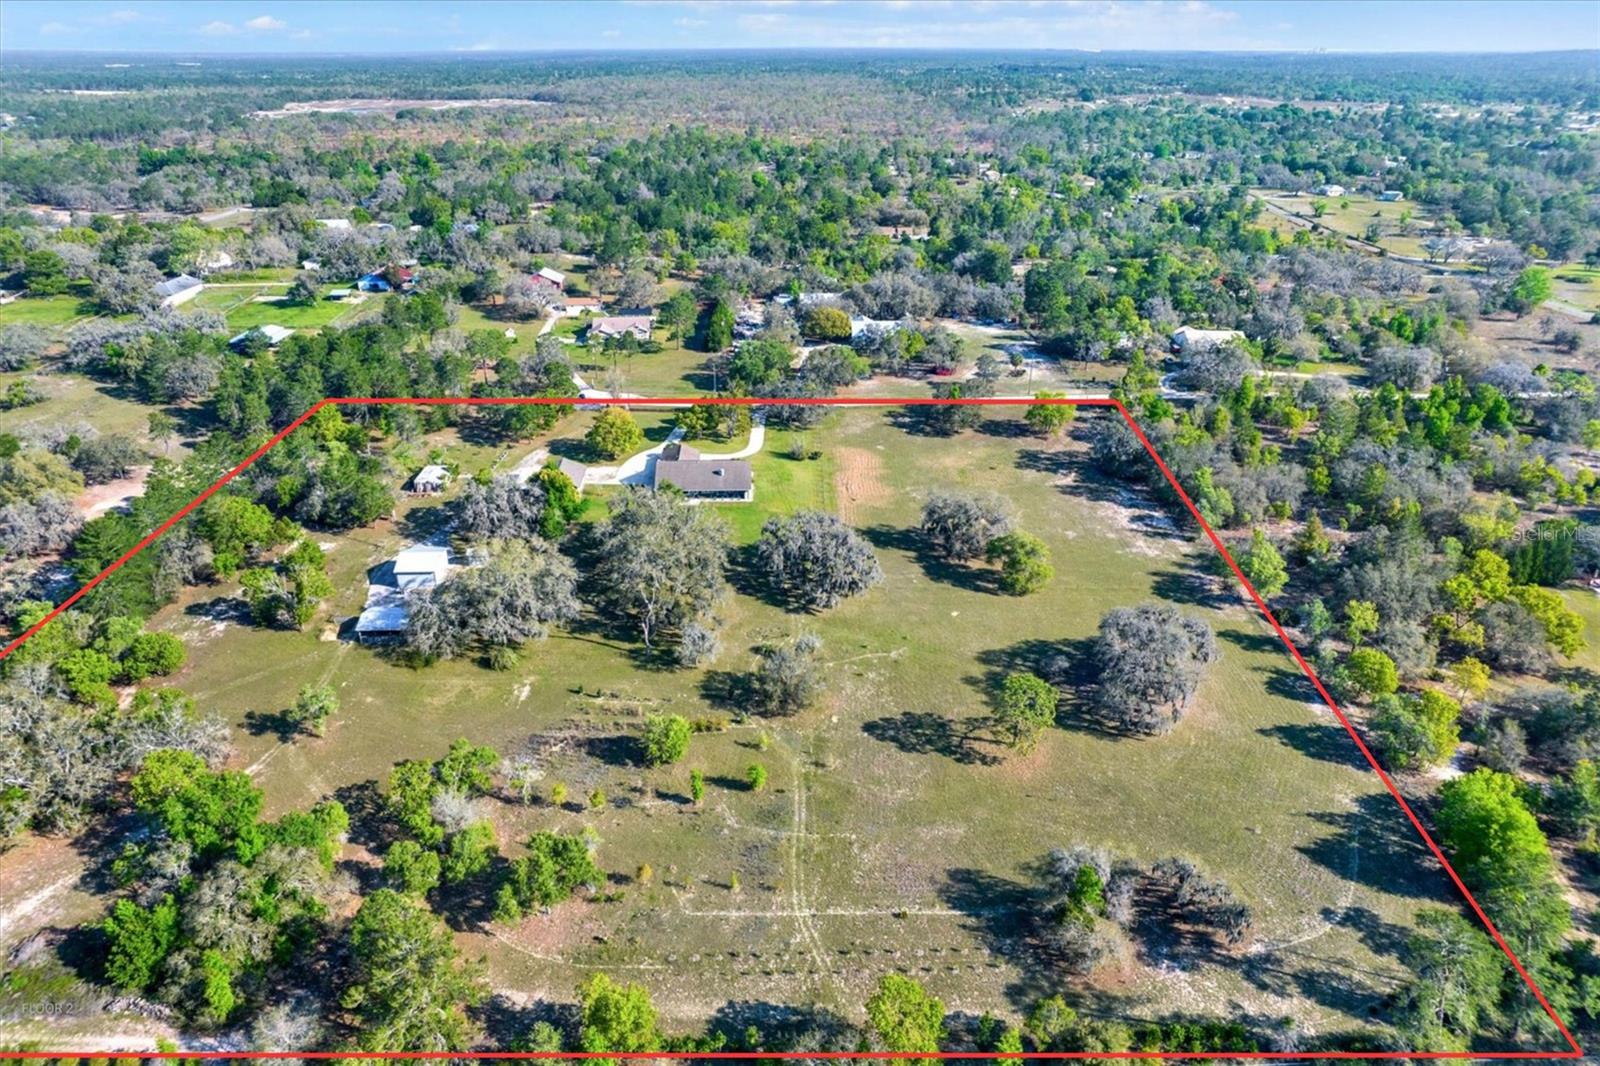 Aerial View - 10 Acres, Fully Fenced!